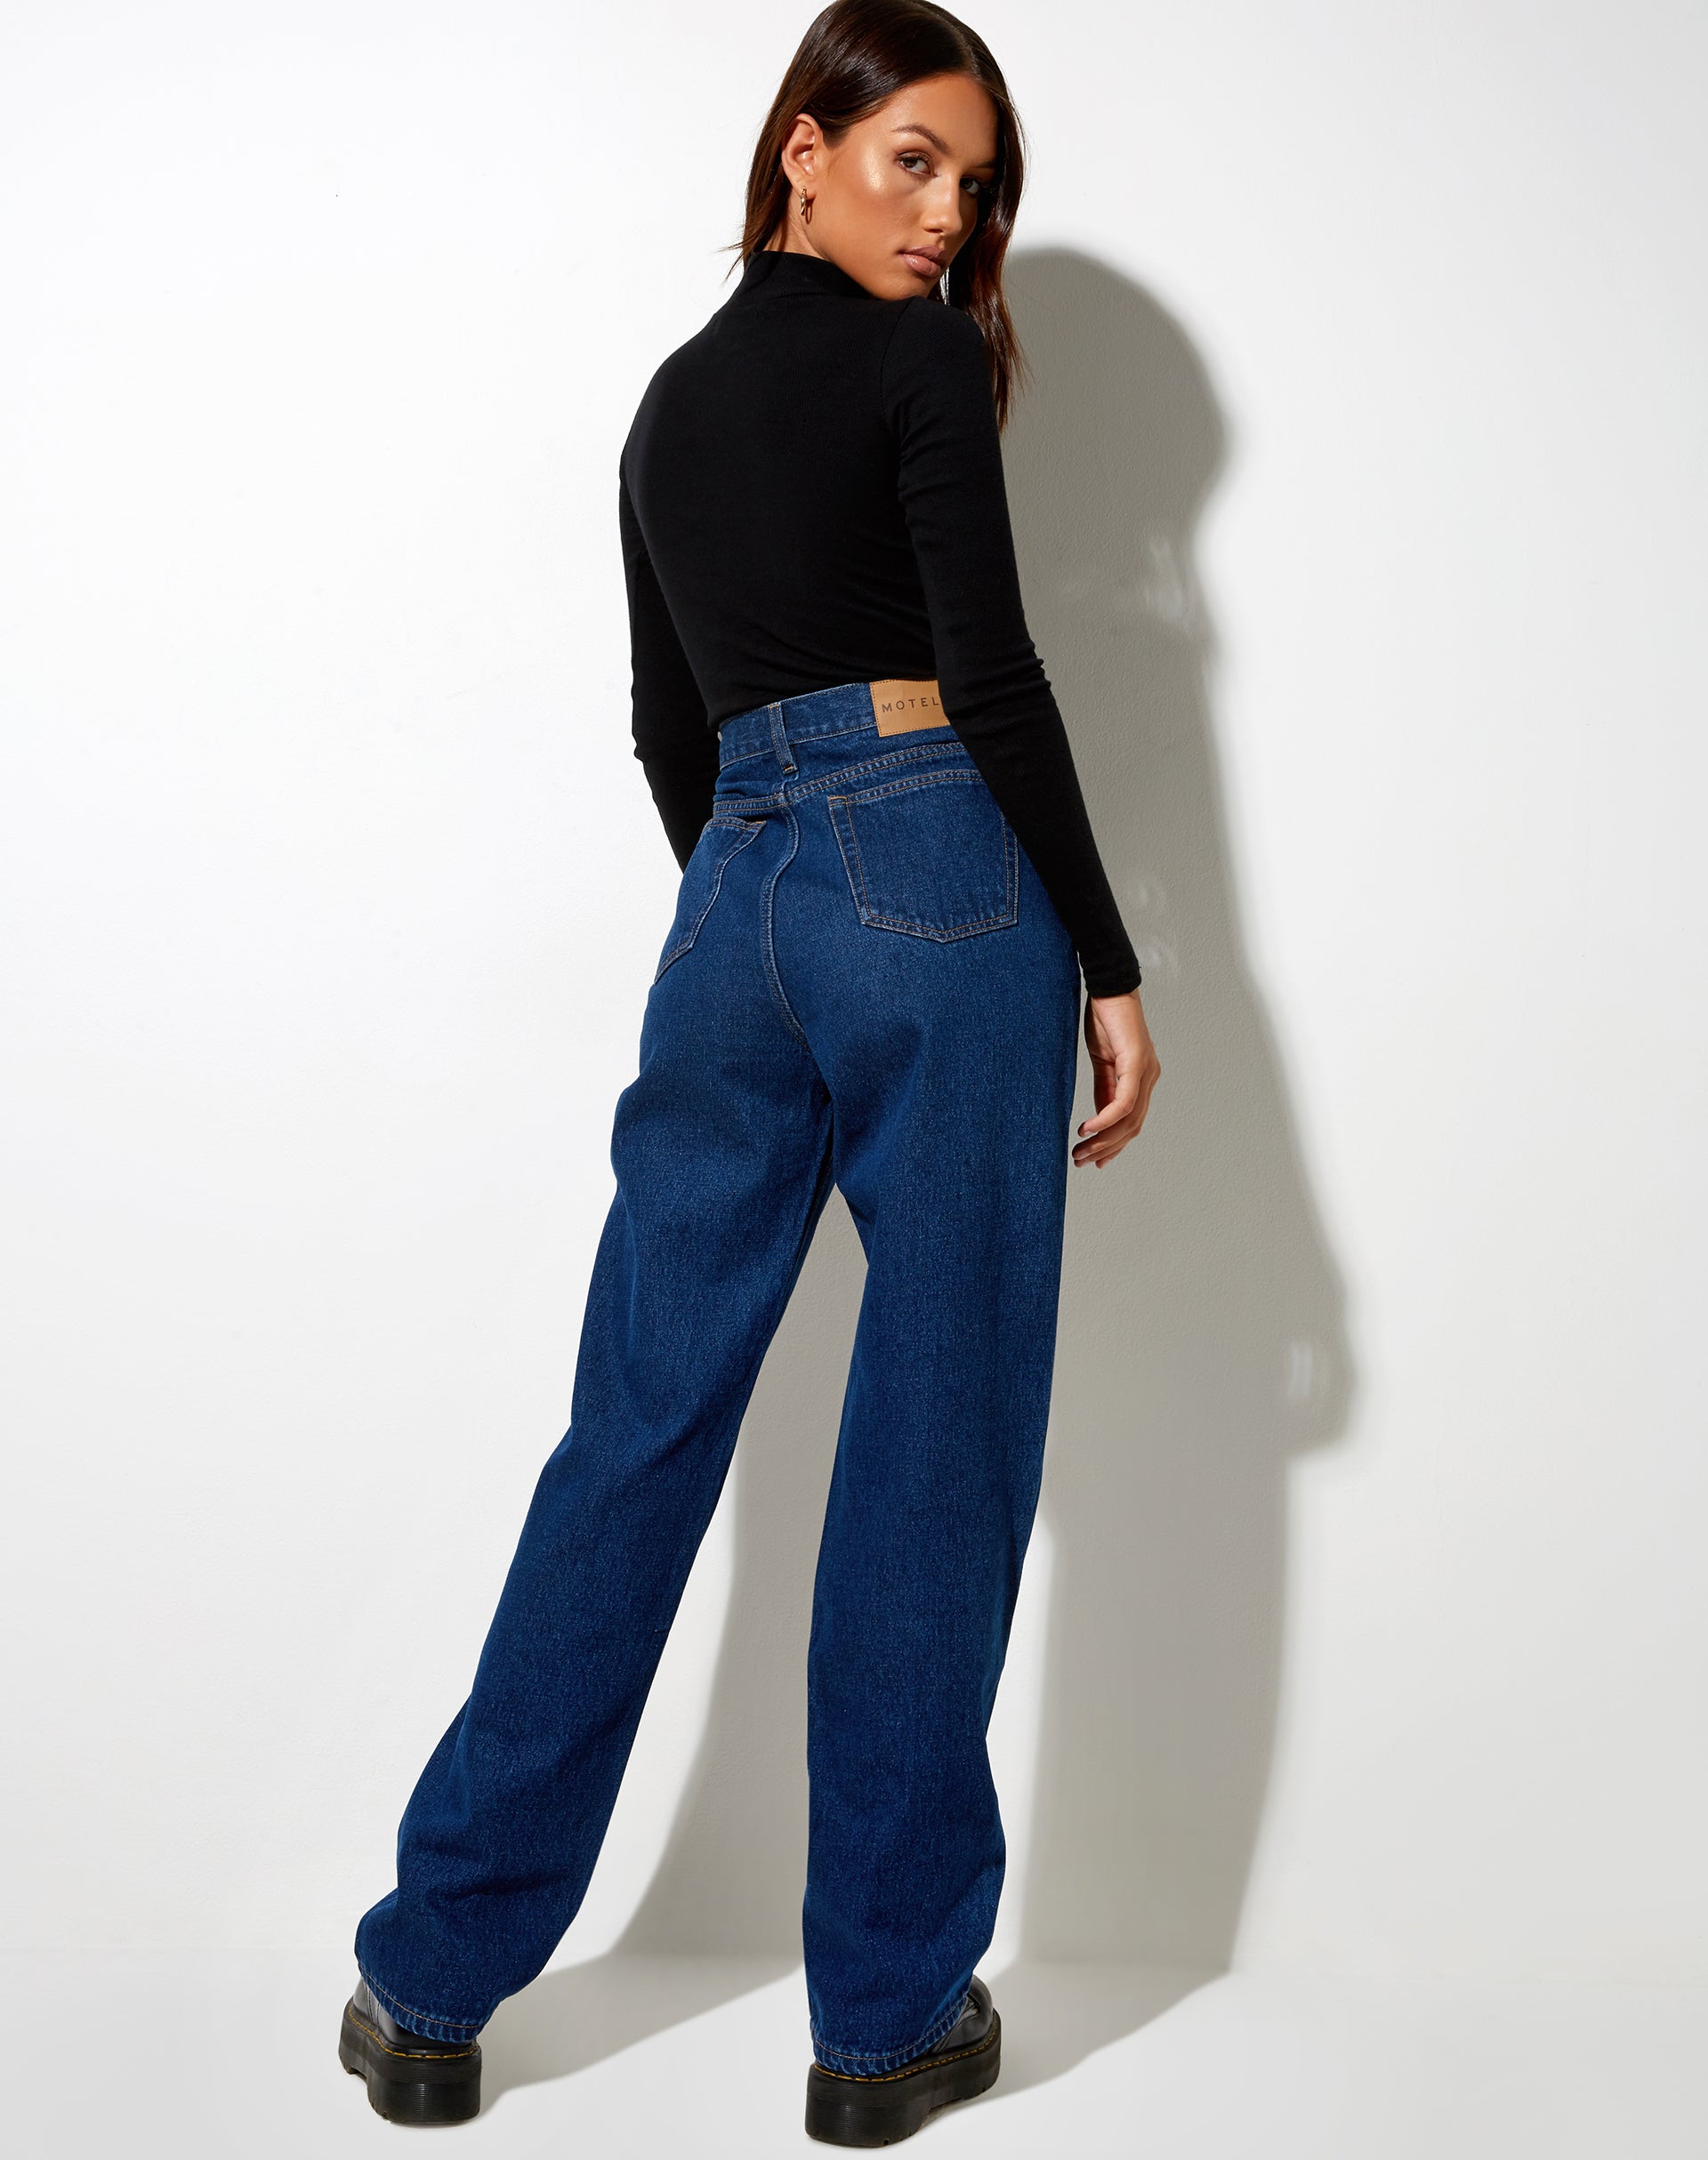 Image of Pleated Jeans in Indigo Blue